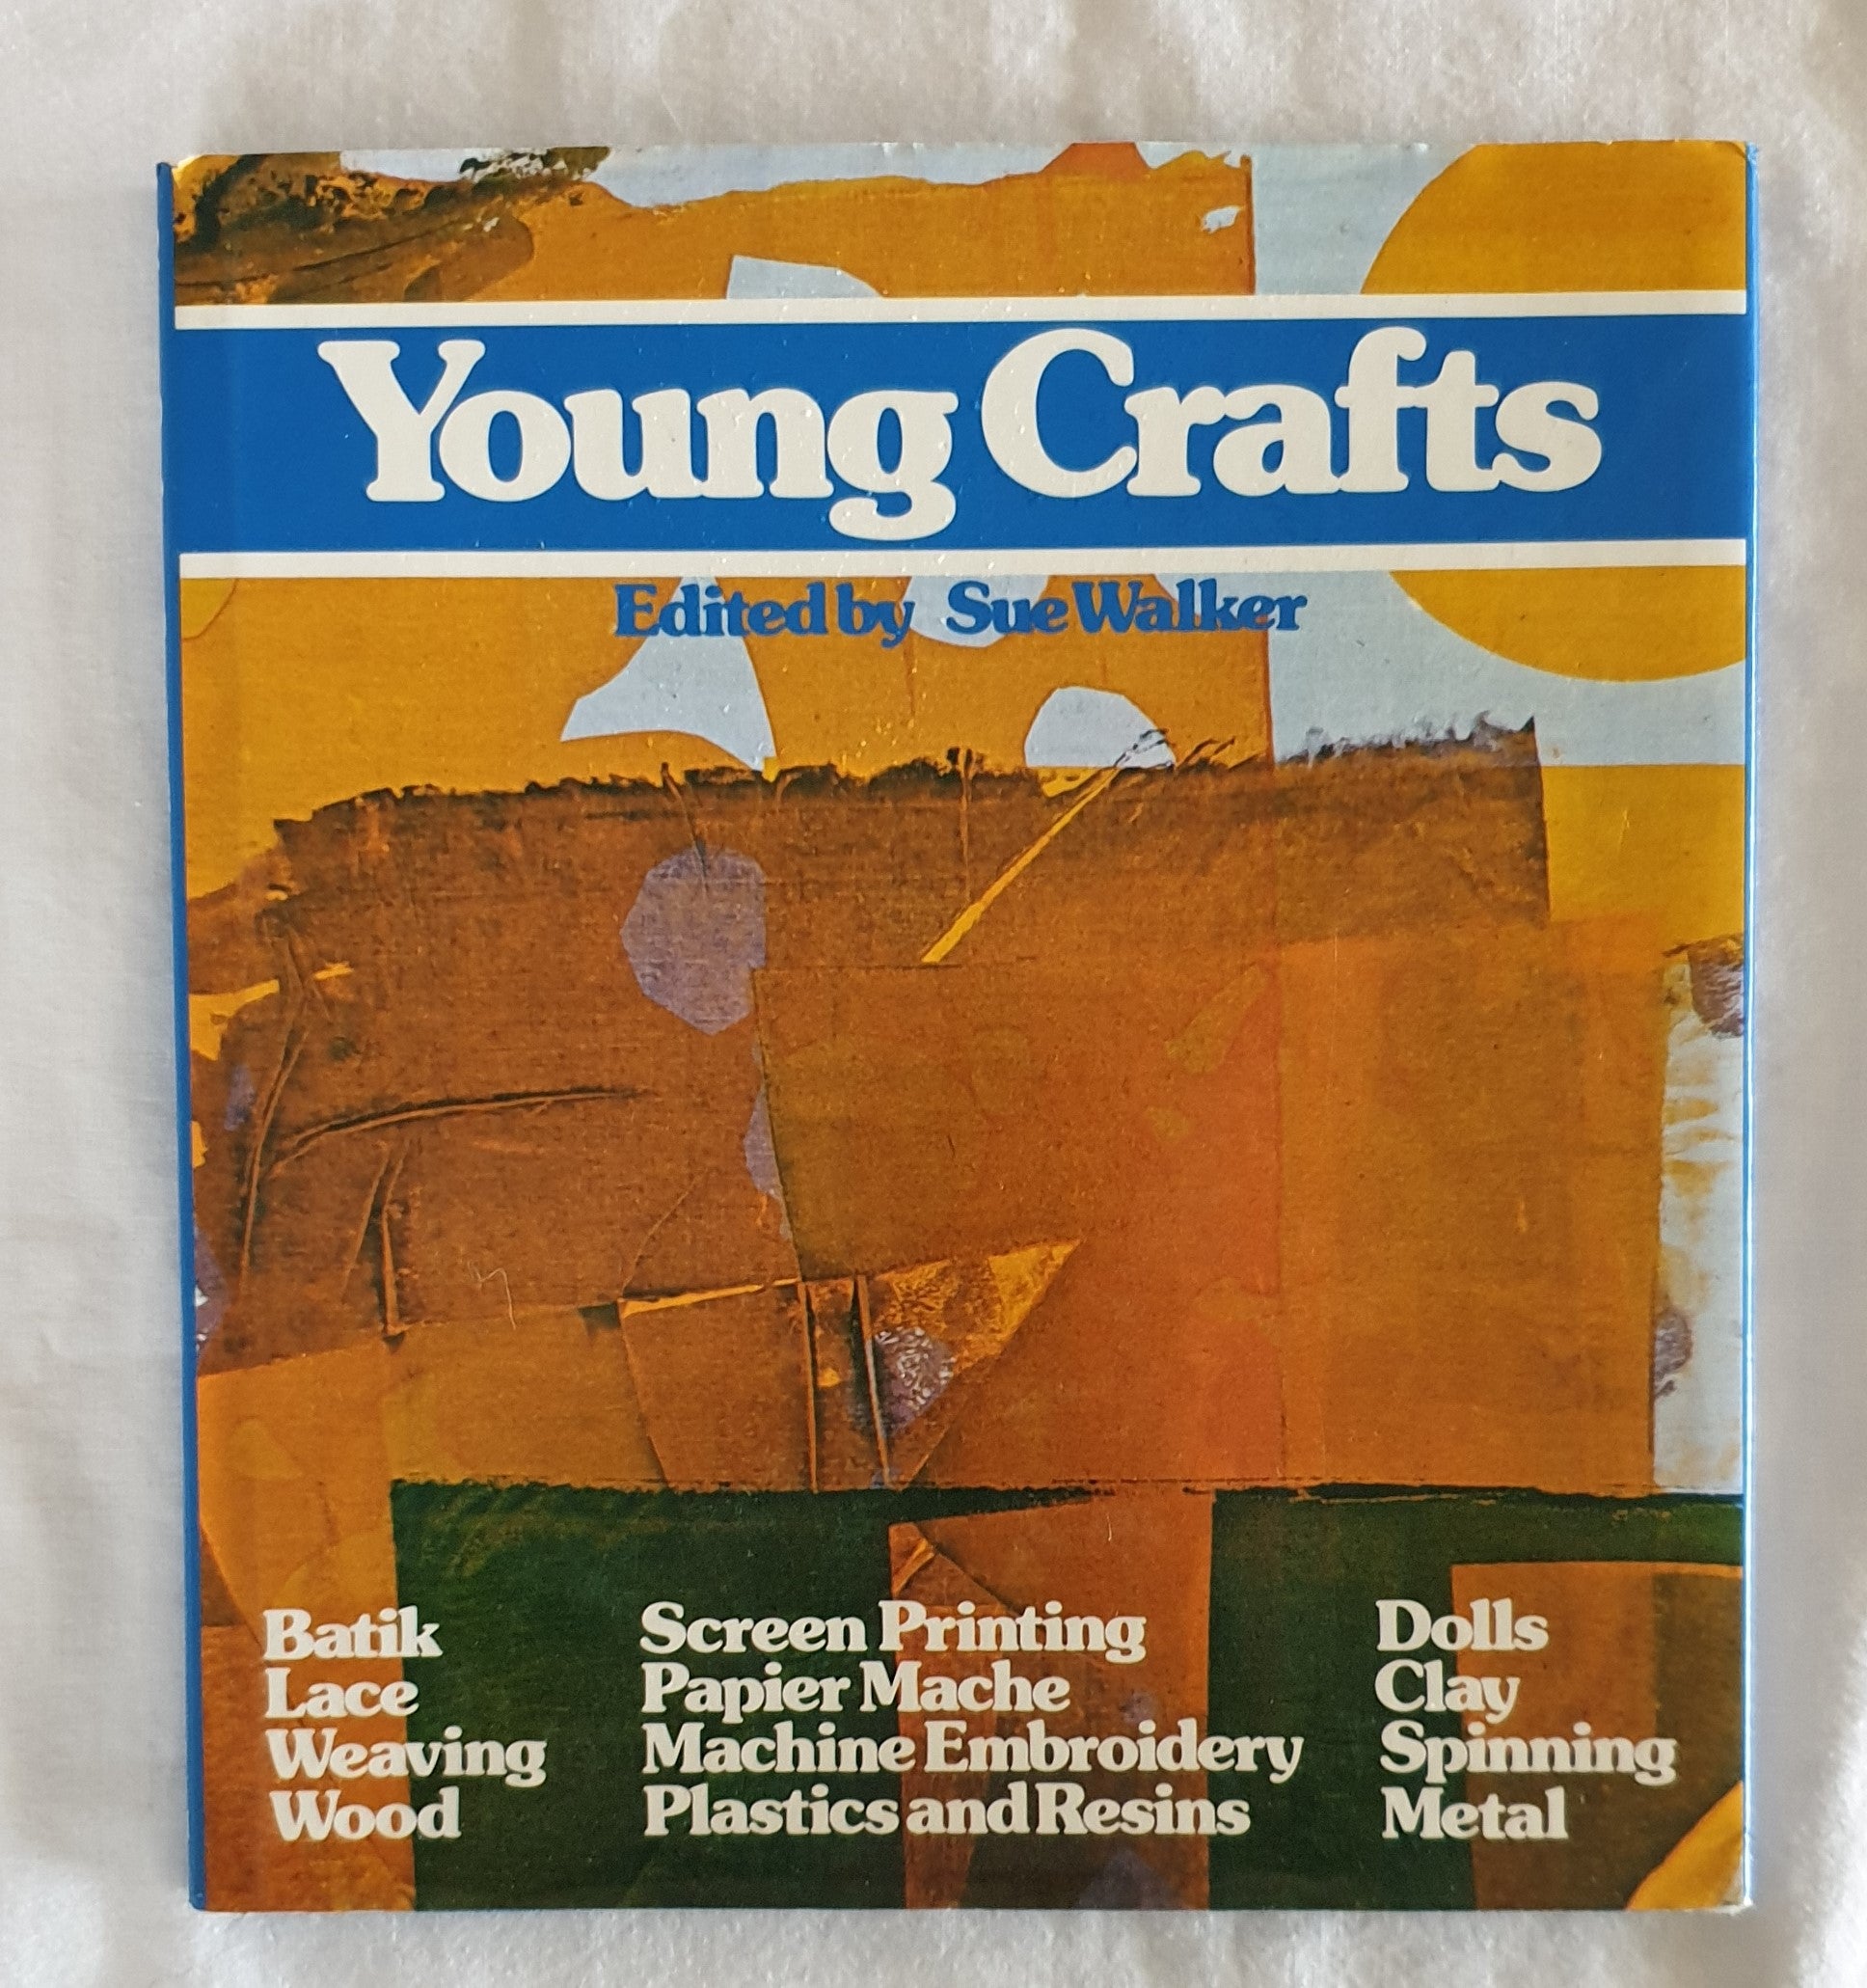 Young Crafts by Sue Walker